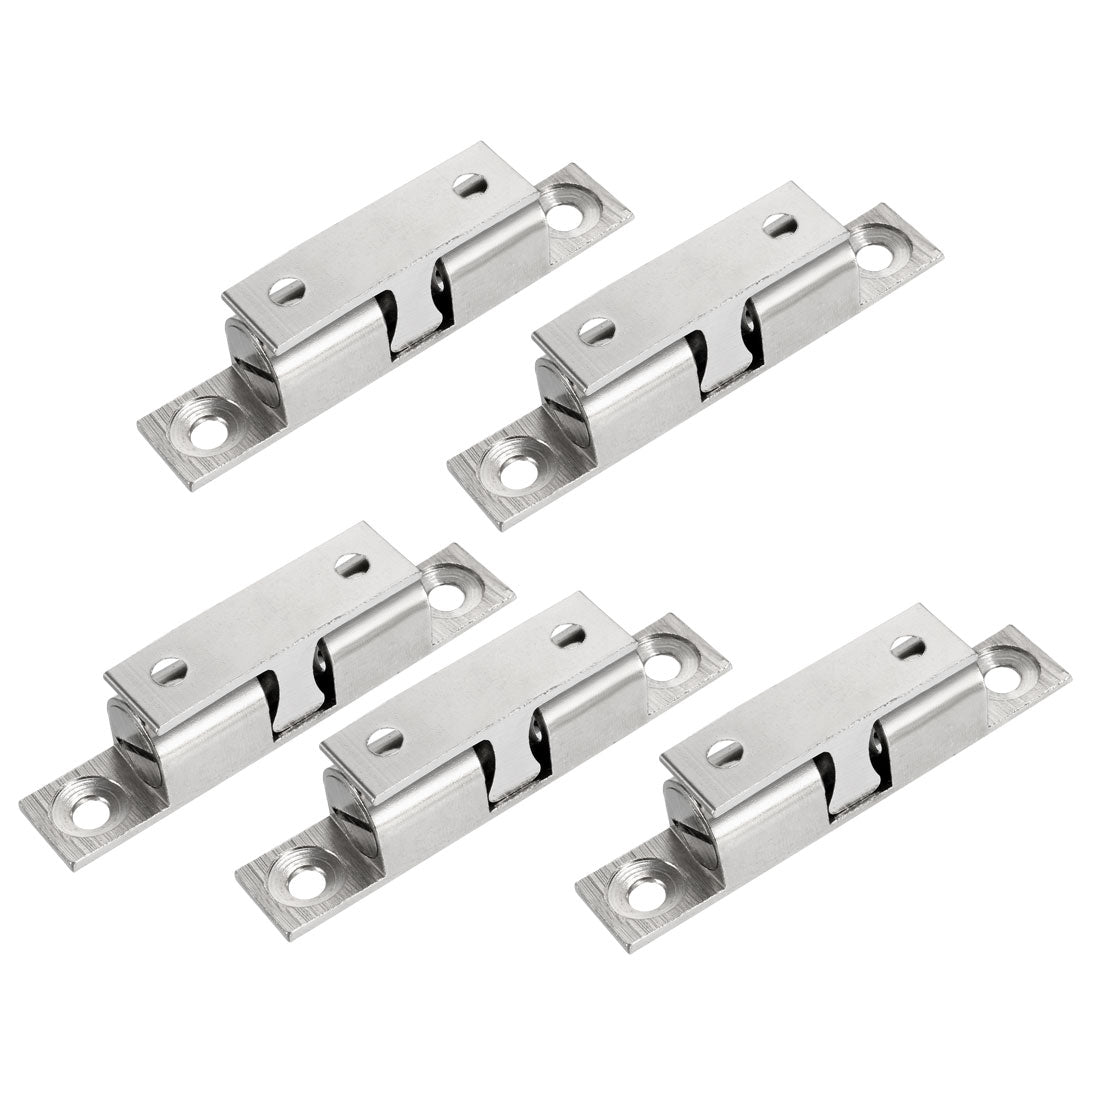 uxcell Uxcell 5pcs Cabinet Door Closet Brass Double Ball Catch Tension Latch 60mm Length Silver Tone